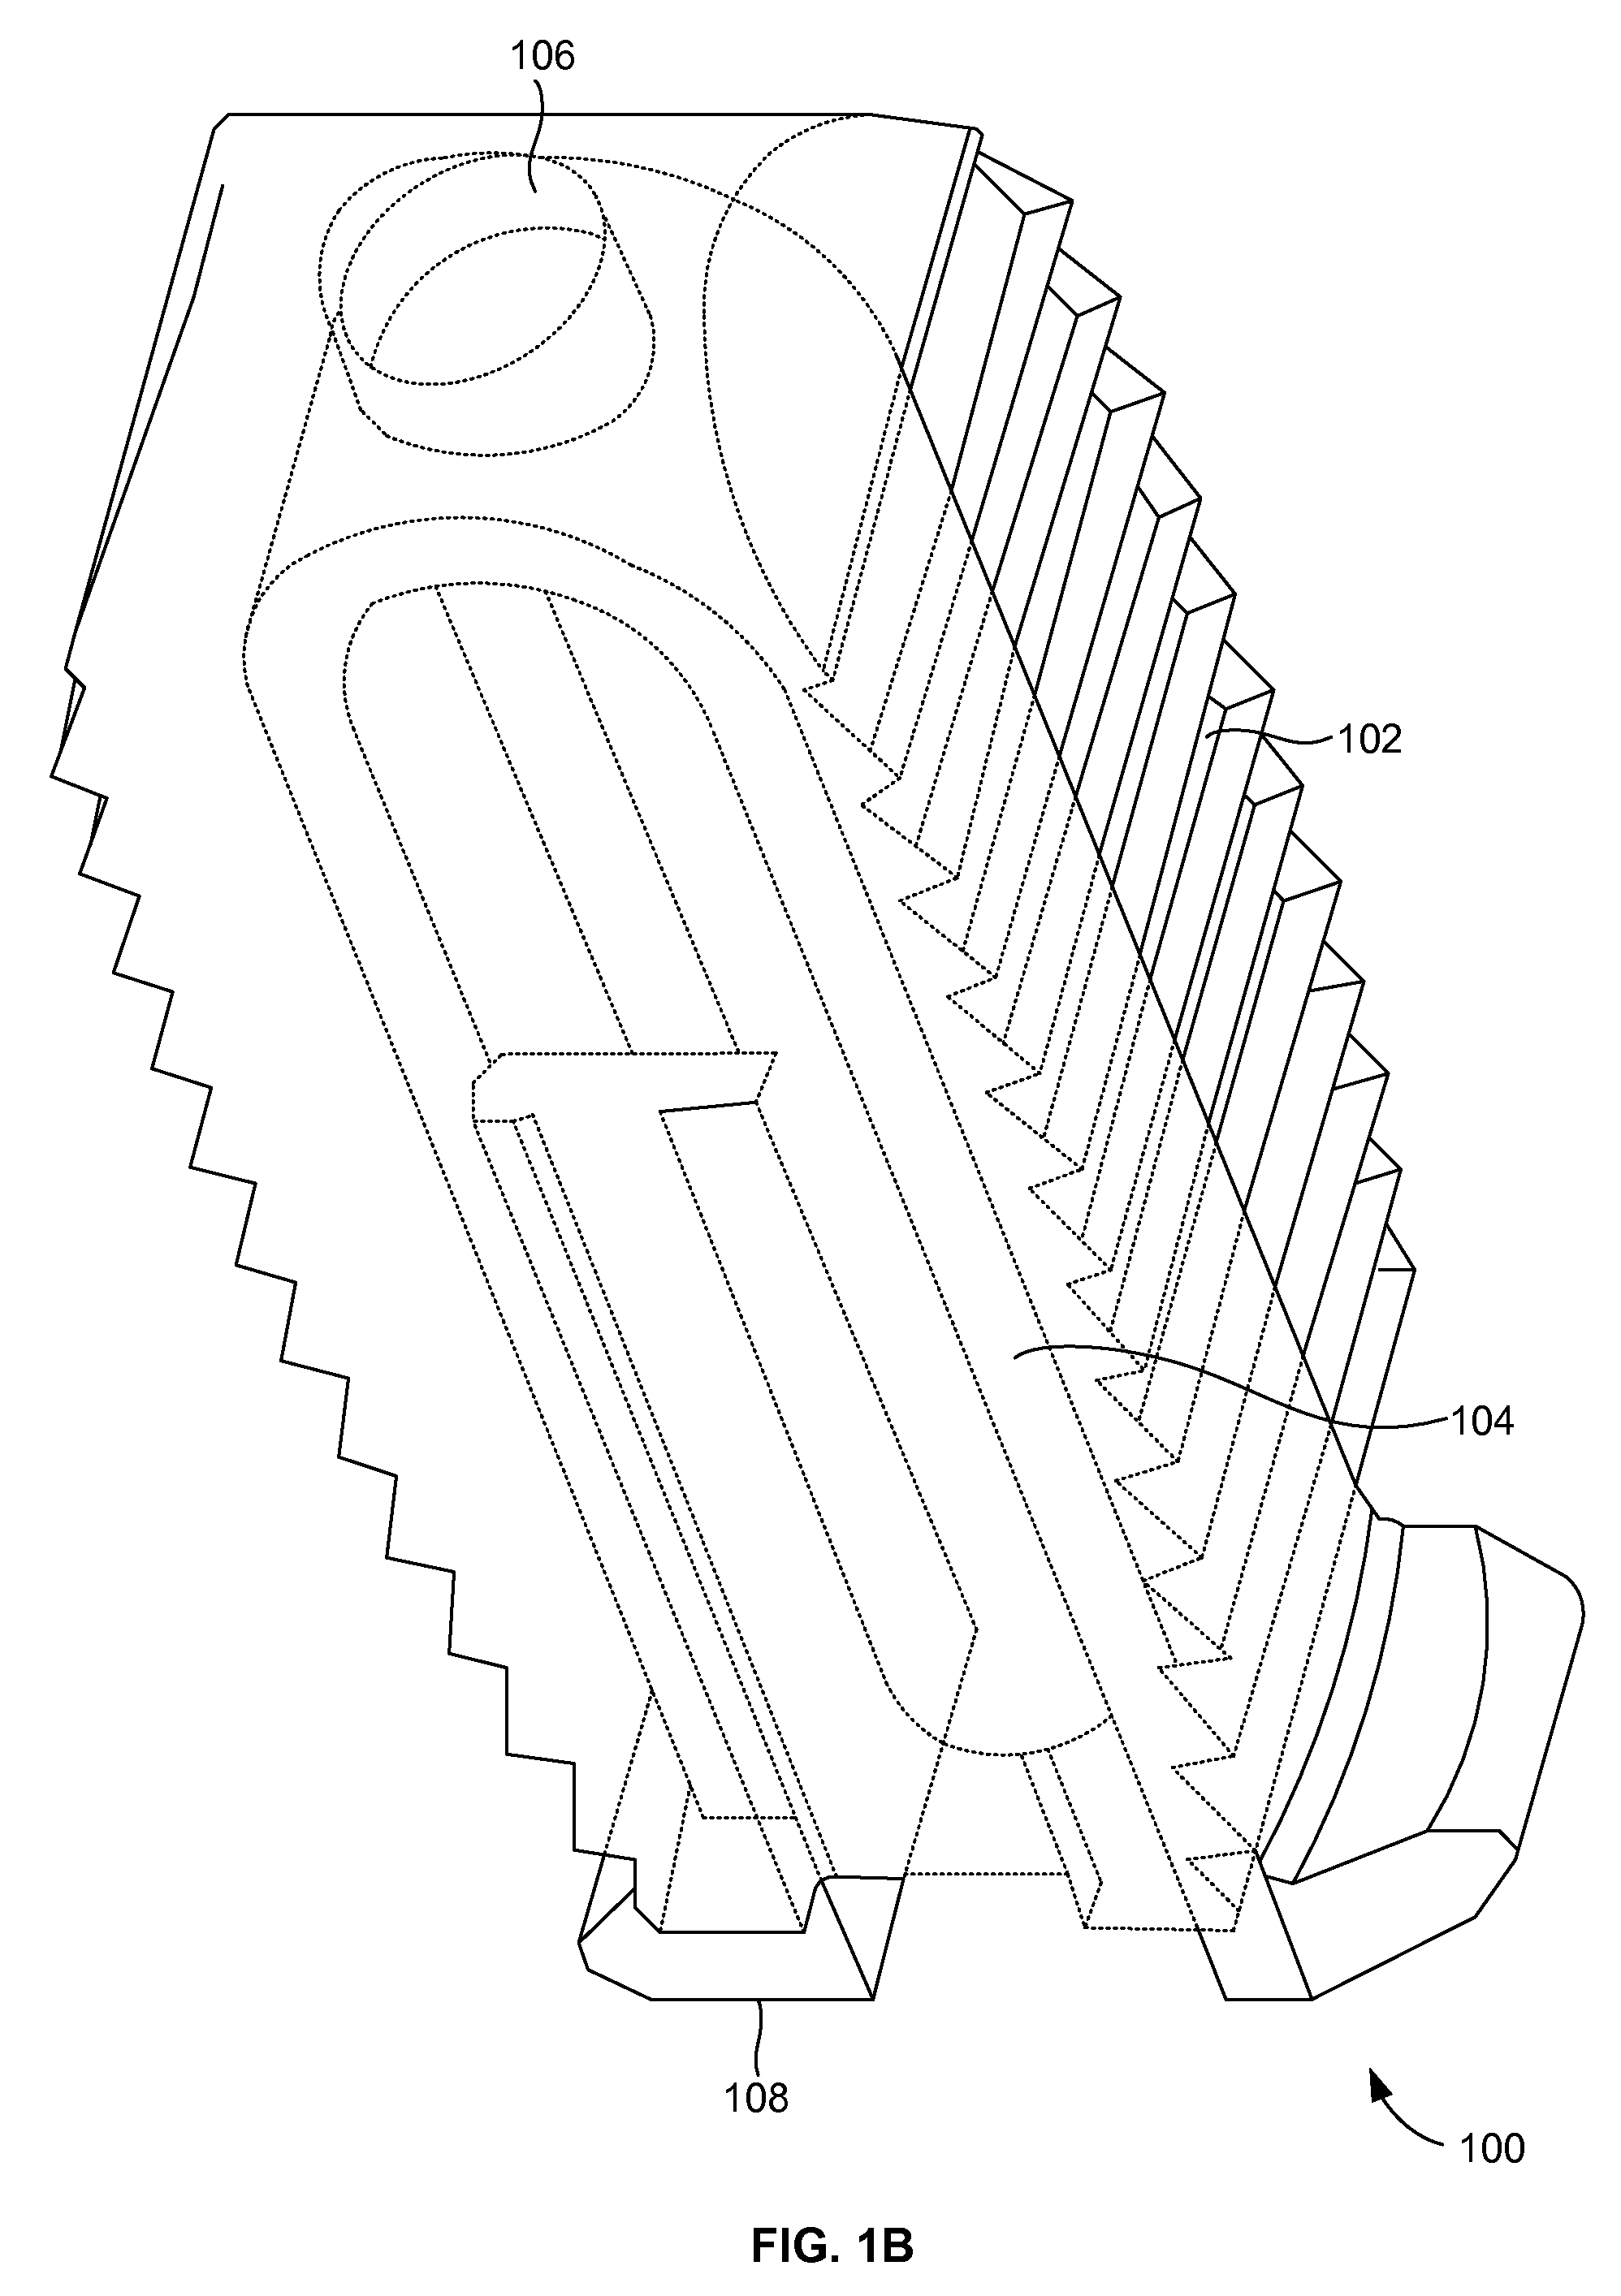 Compliant interbody fusion device with deployable bone anchors